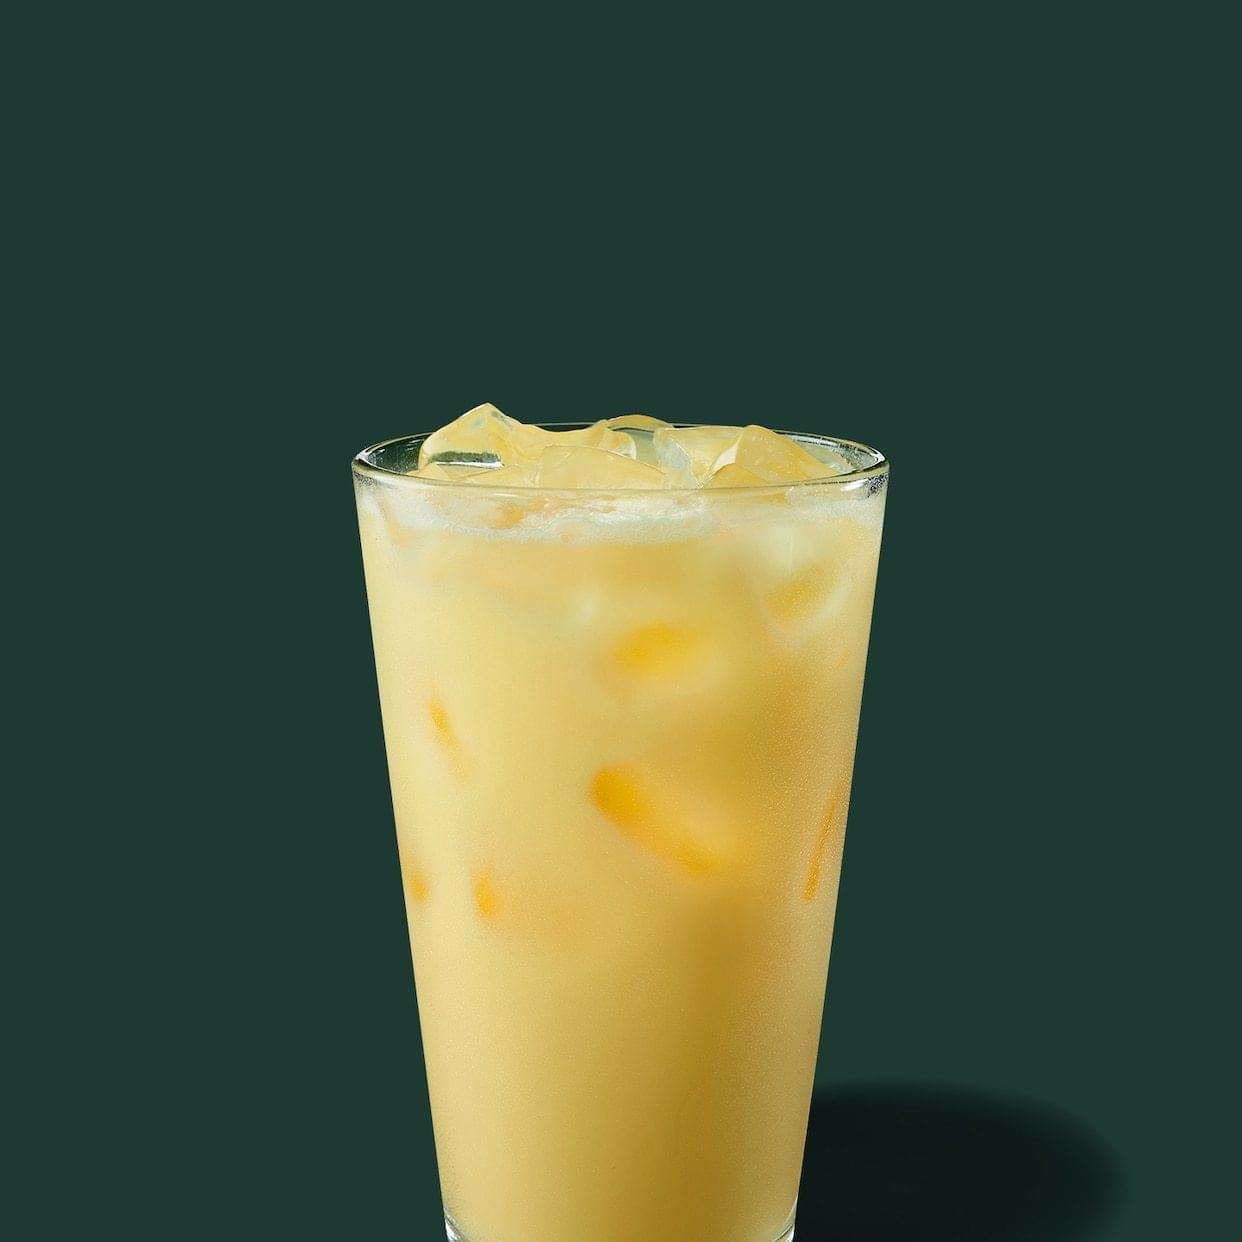 Starbucks Iced Golden Ginger Drink Venti Nutrition Facts